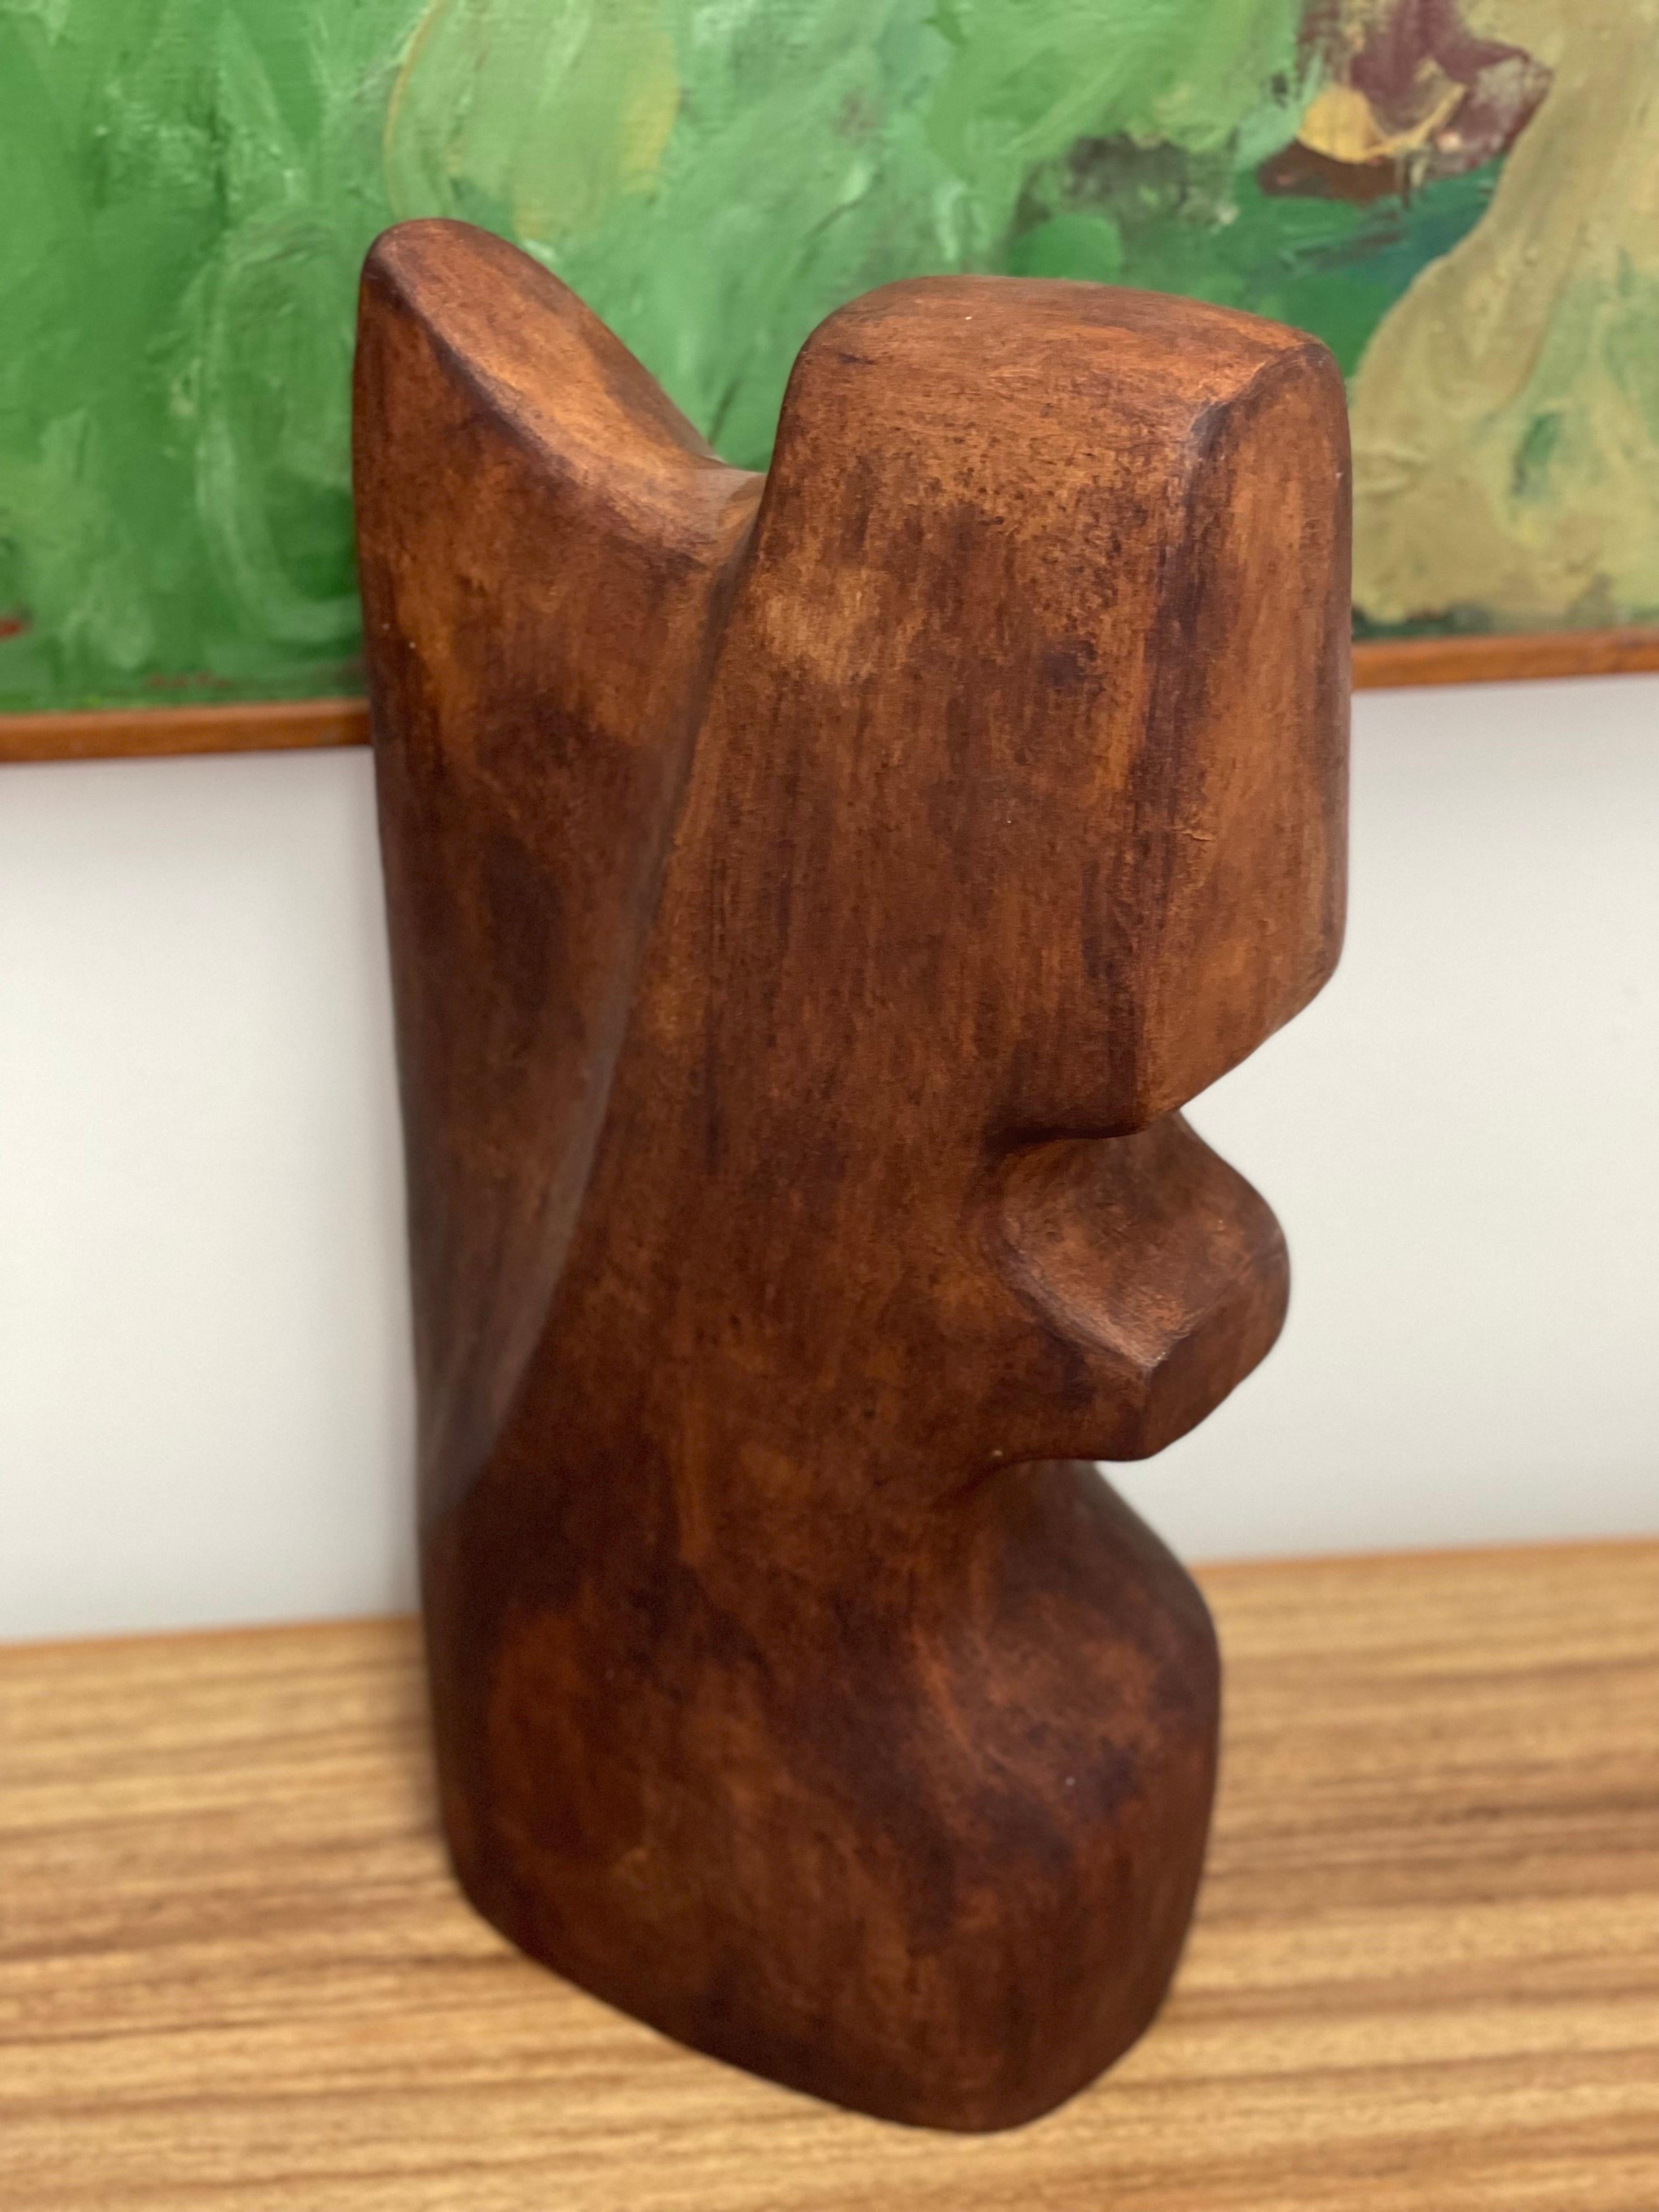 Wood Vintage Biomorphic Clay Signed Sculpture by Washington Artist Ruth Humphrey For Sale